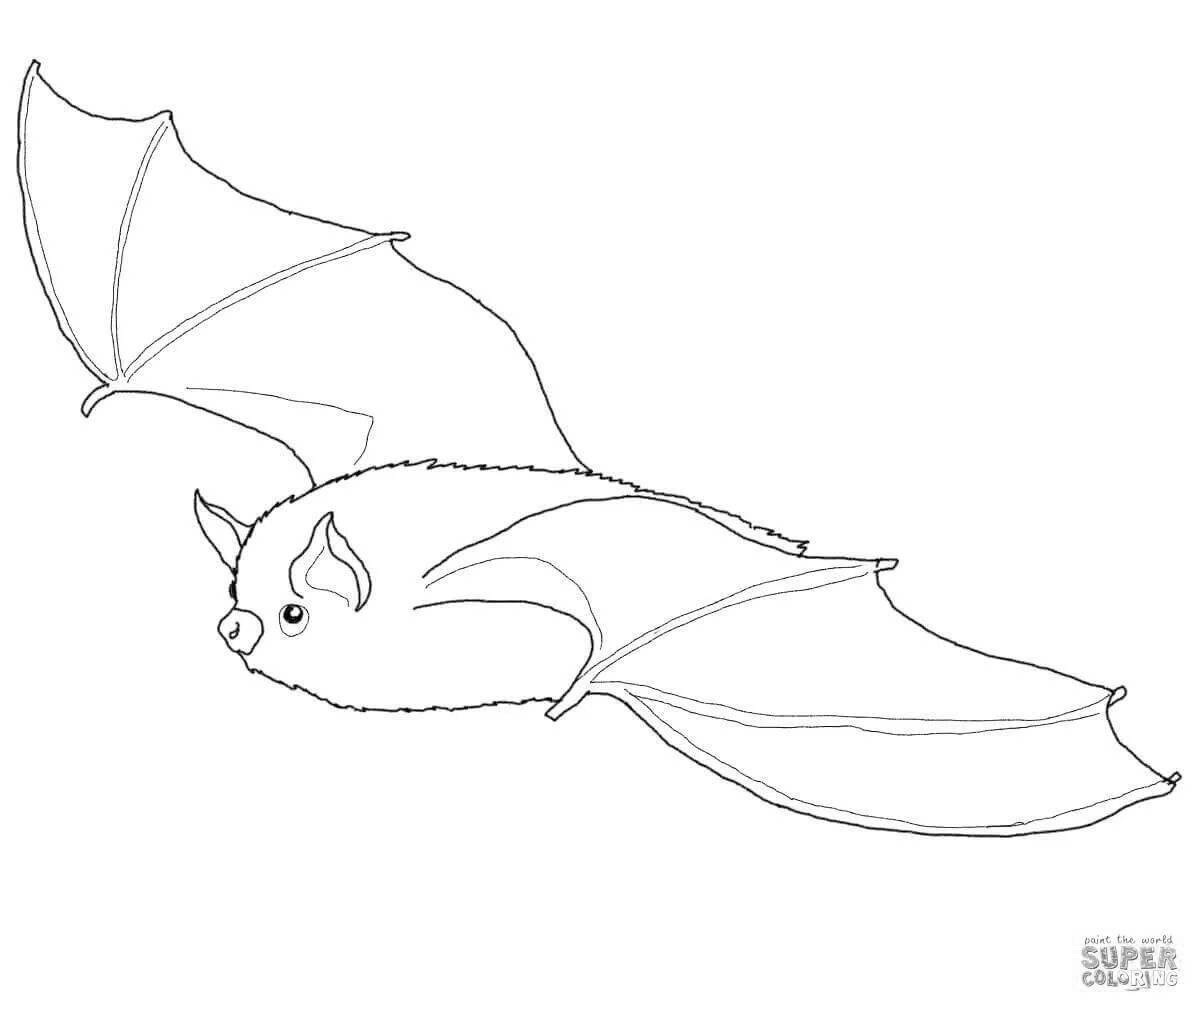 Coloring page dazzling flying mouse